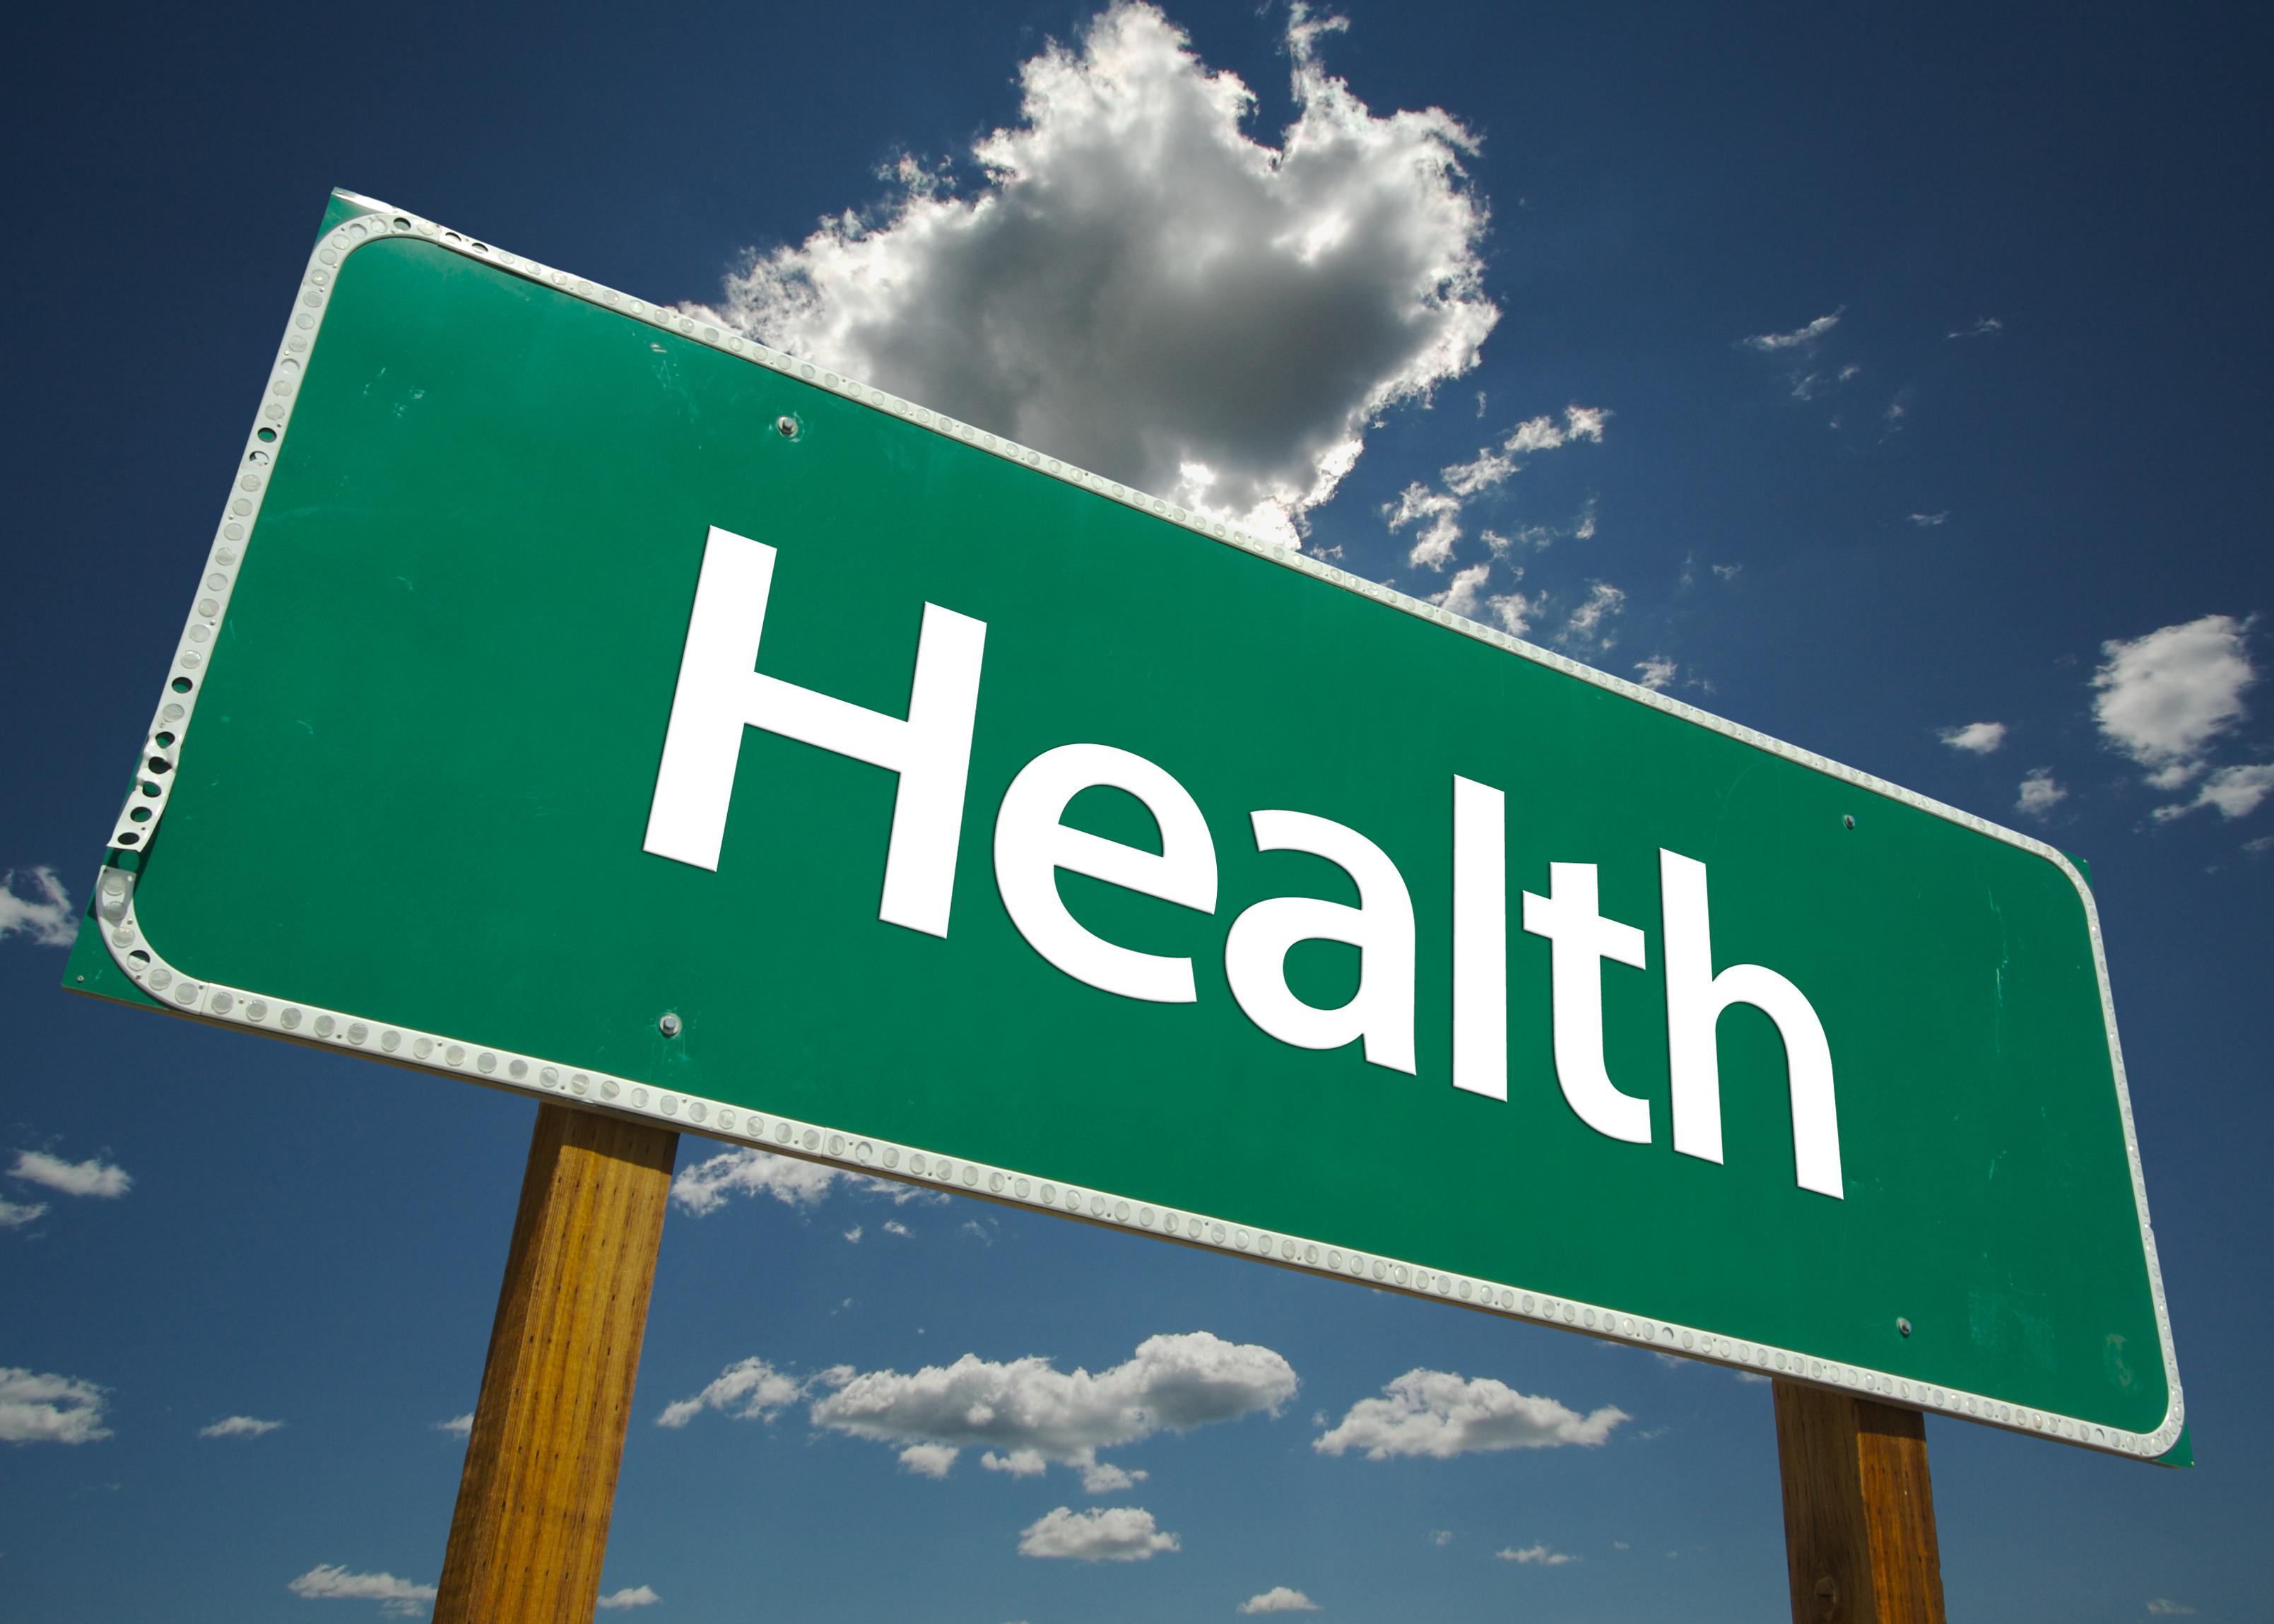 A green road sign with the word “Health” is pictured against a blue sky with white clouds.